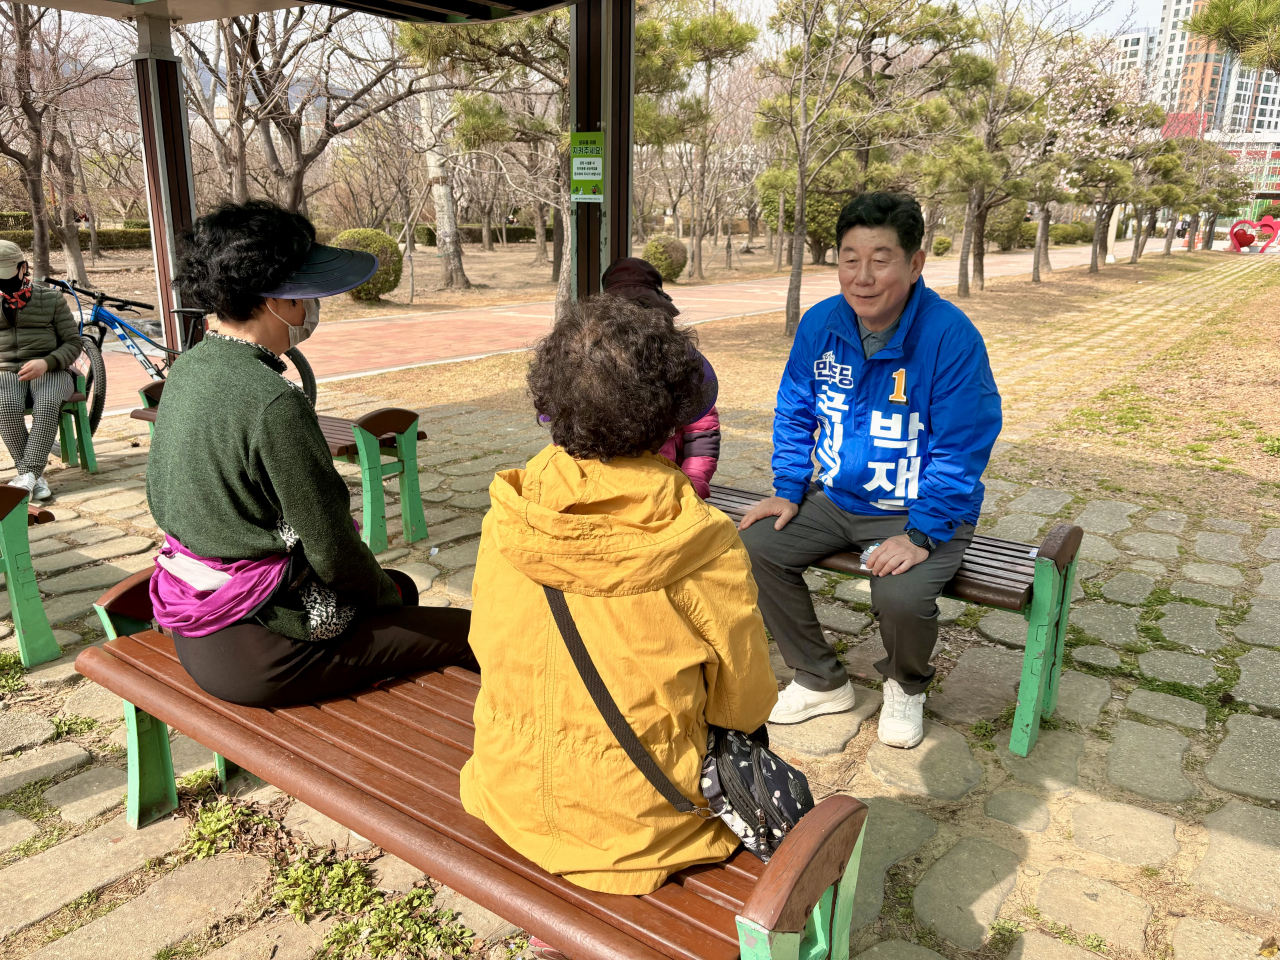 Democratic Party of Korea Rep. Park Jae-ho, clad in the blue that represents his party, speaks with residents at a park in Nam-gu, Busan, where he is running to be lawmaker, Sunday. (Kim Arin/The Korea Herald)